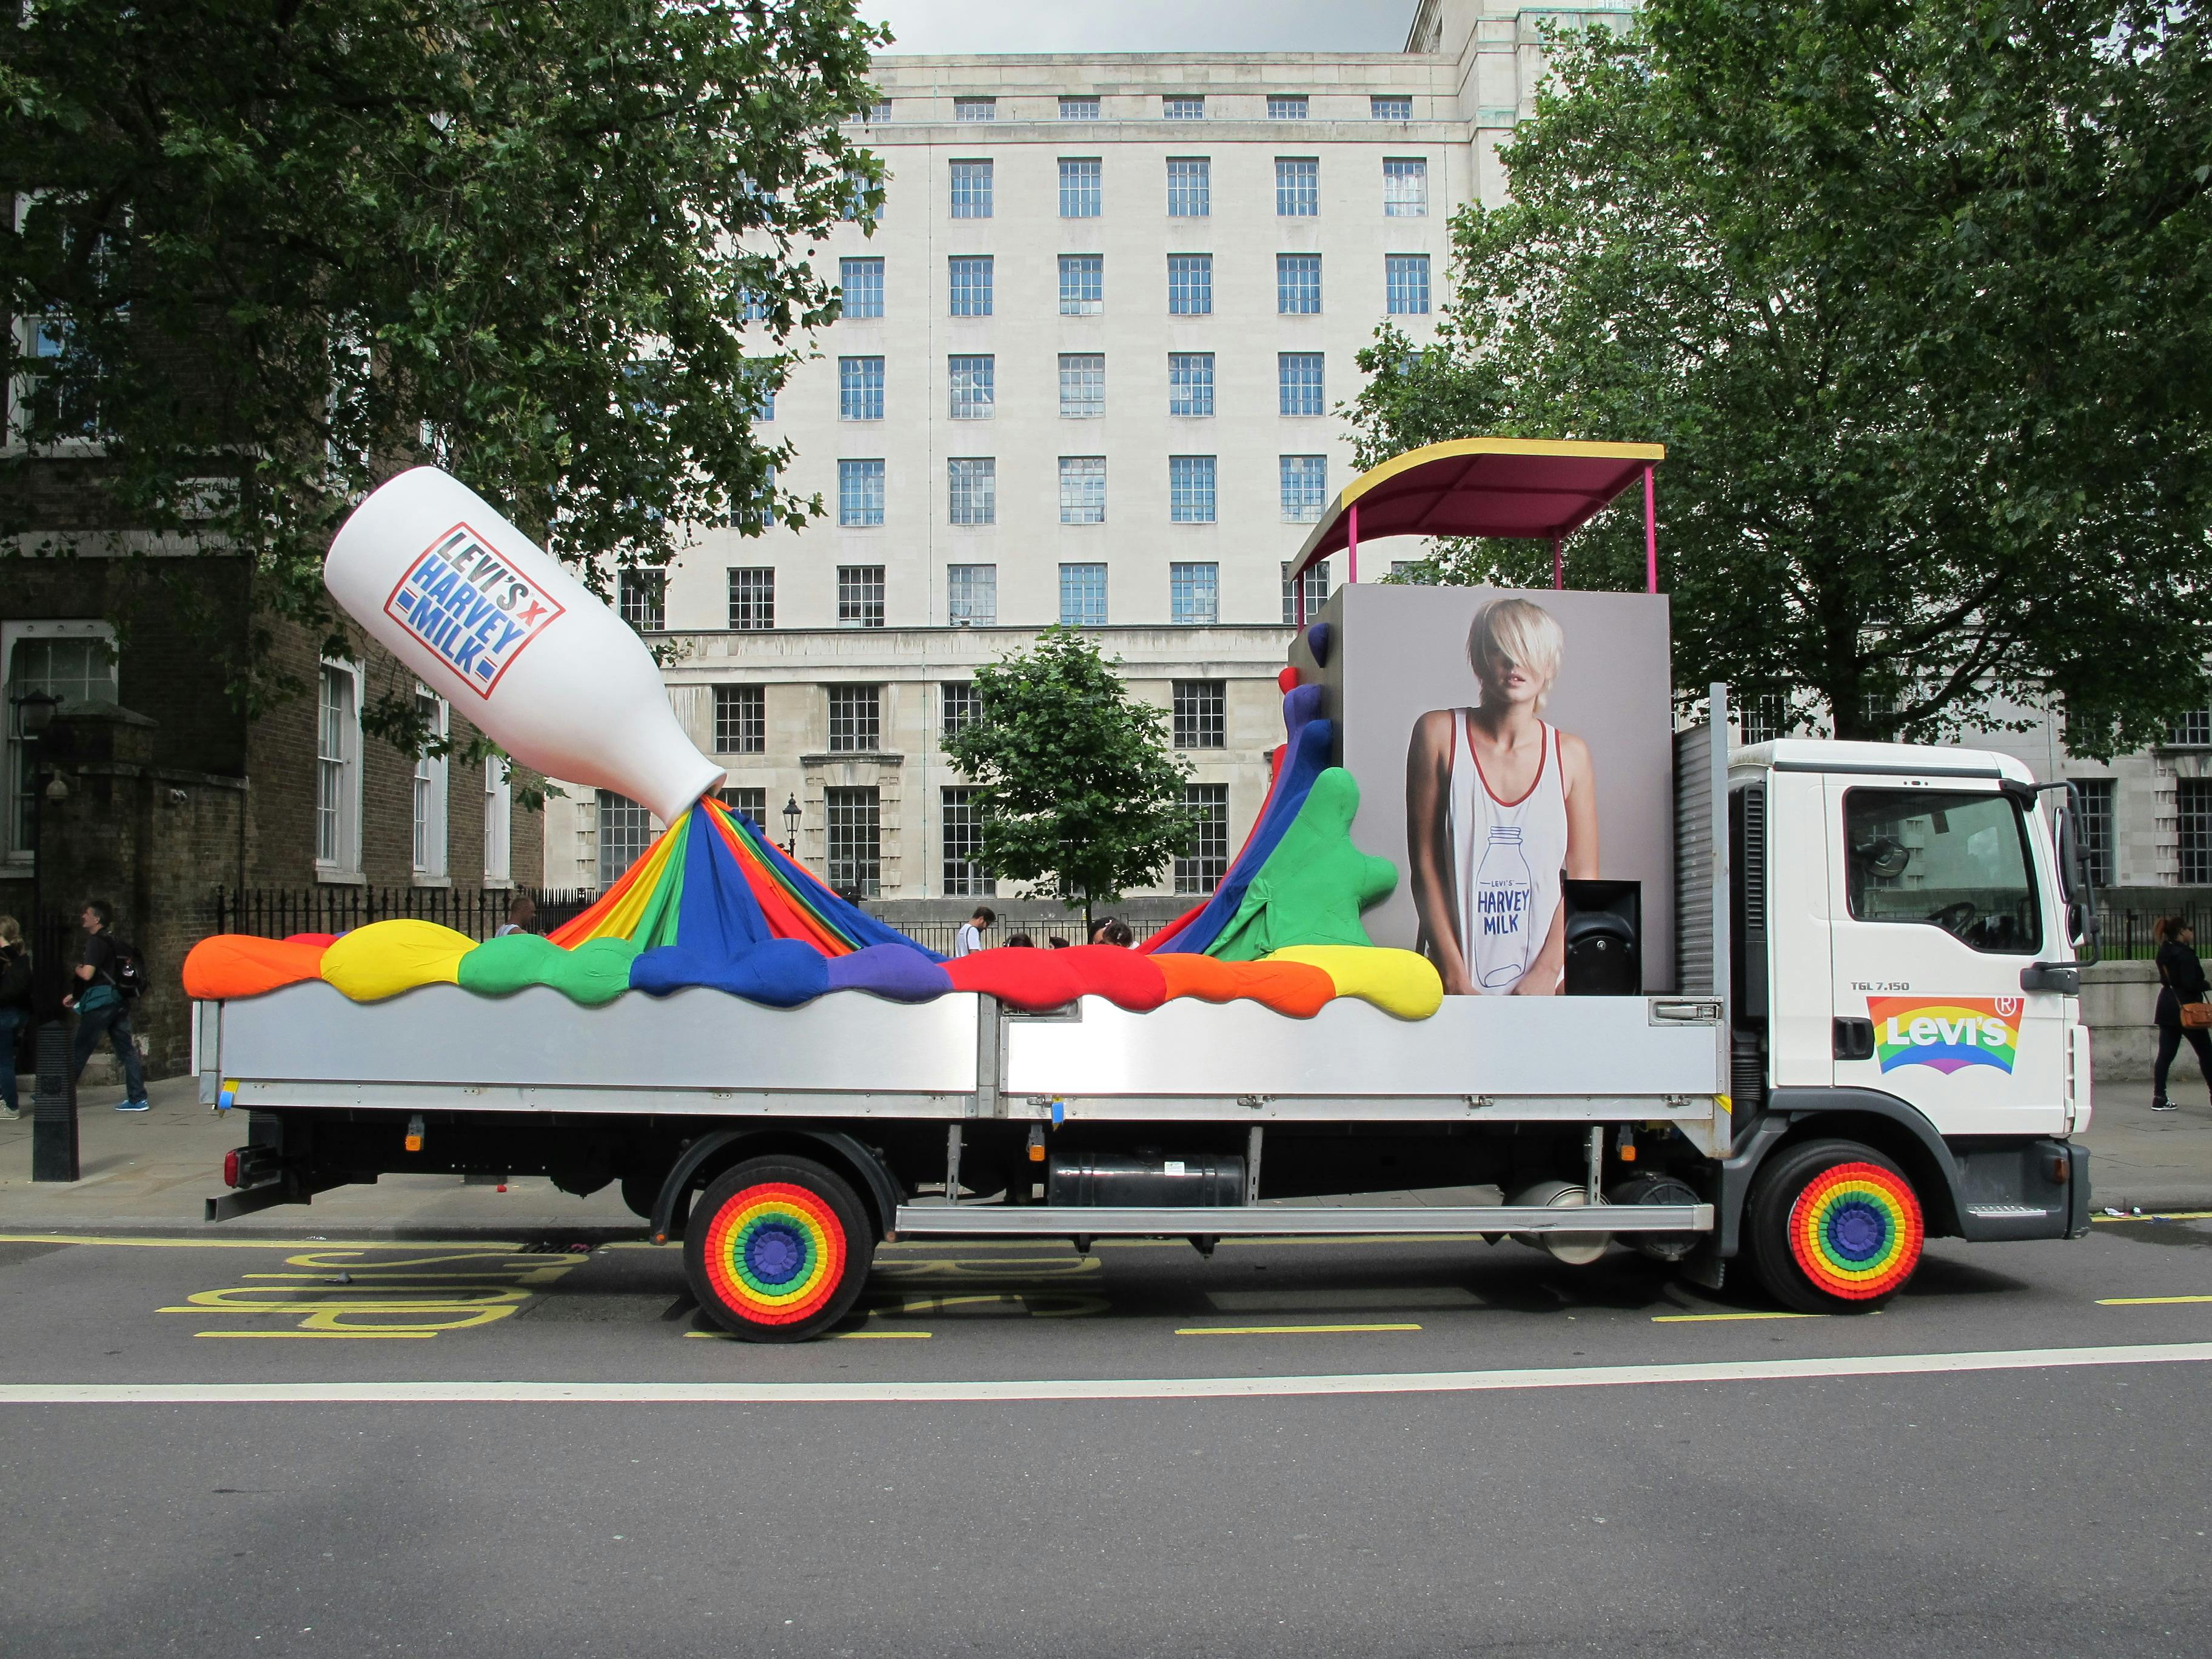 Levis Pride Floats and installations